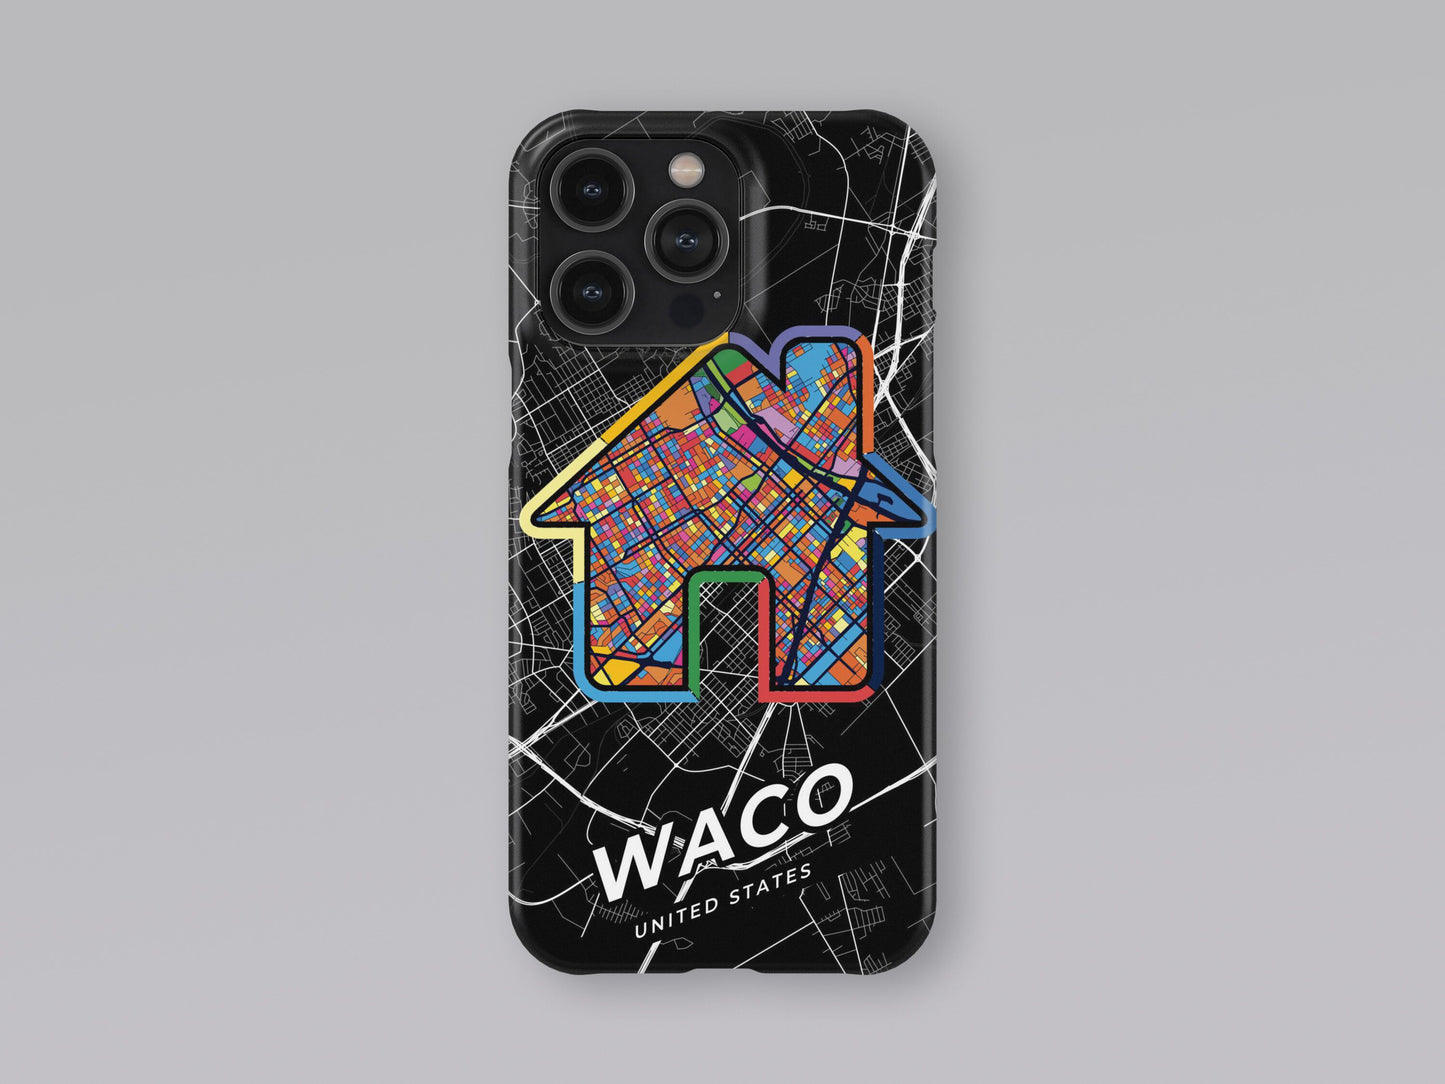 Waco Texas slim phone case with colorful icon 3